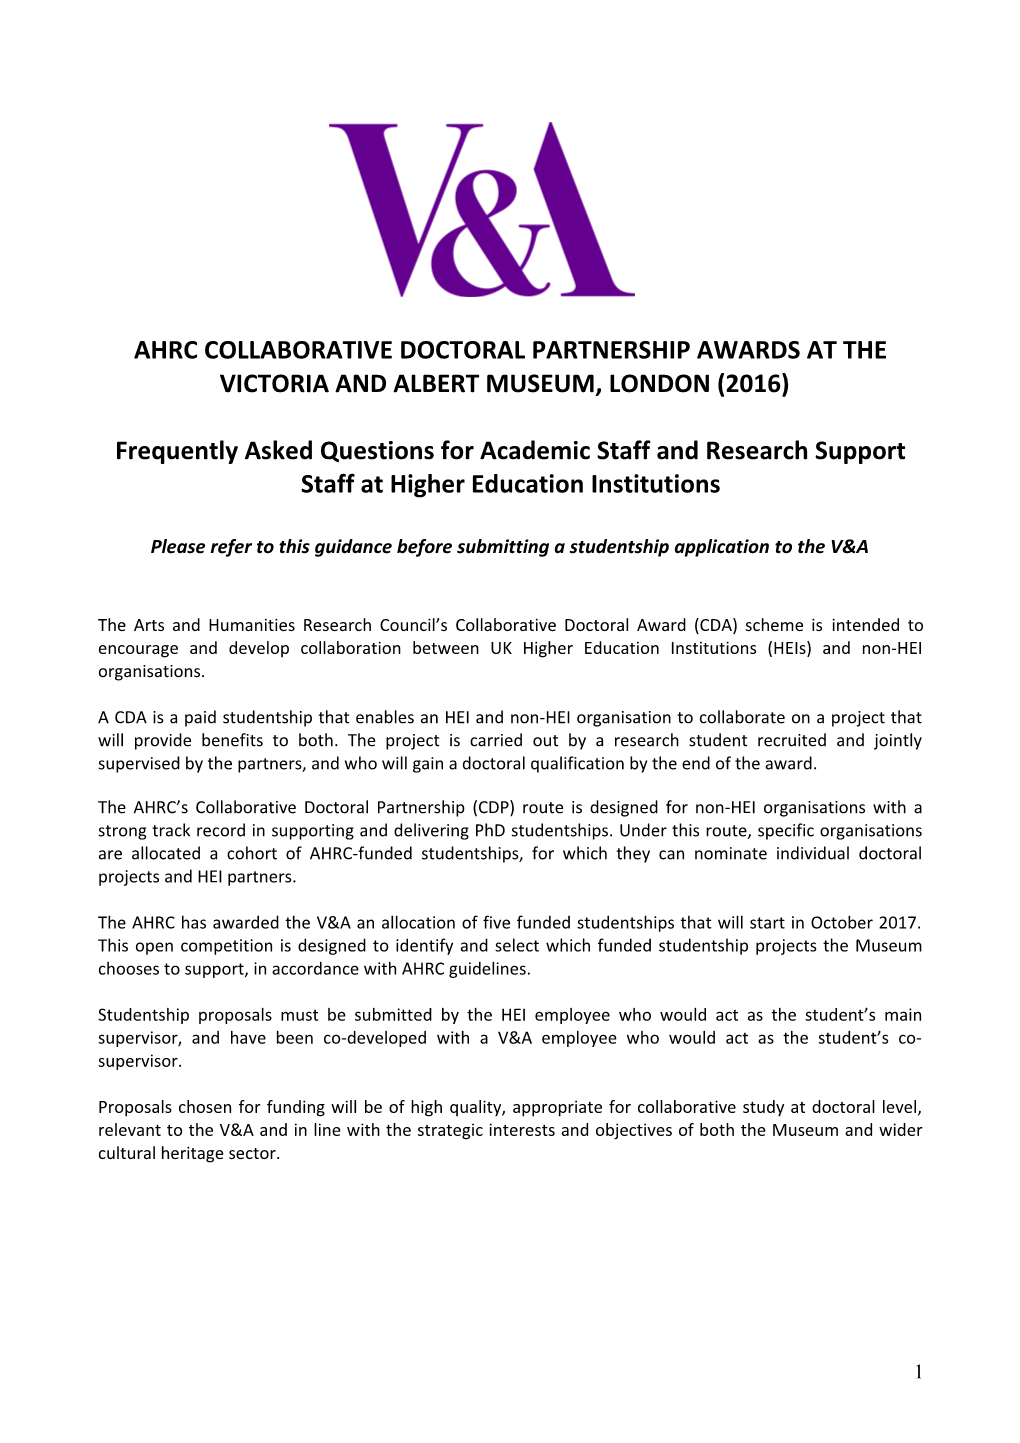 AHRC Doctoral Studentship Funding Available Call for Project Proposals from V&A Colleagues